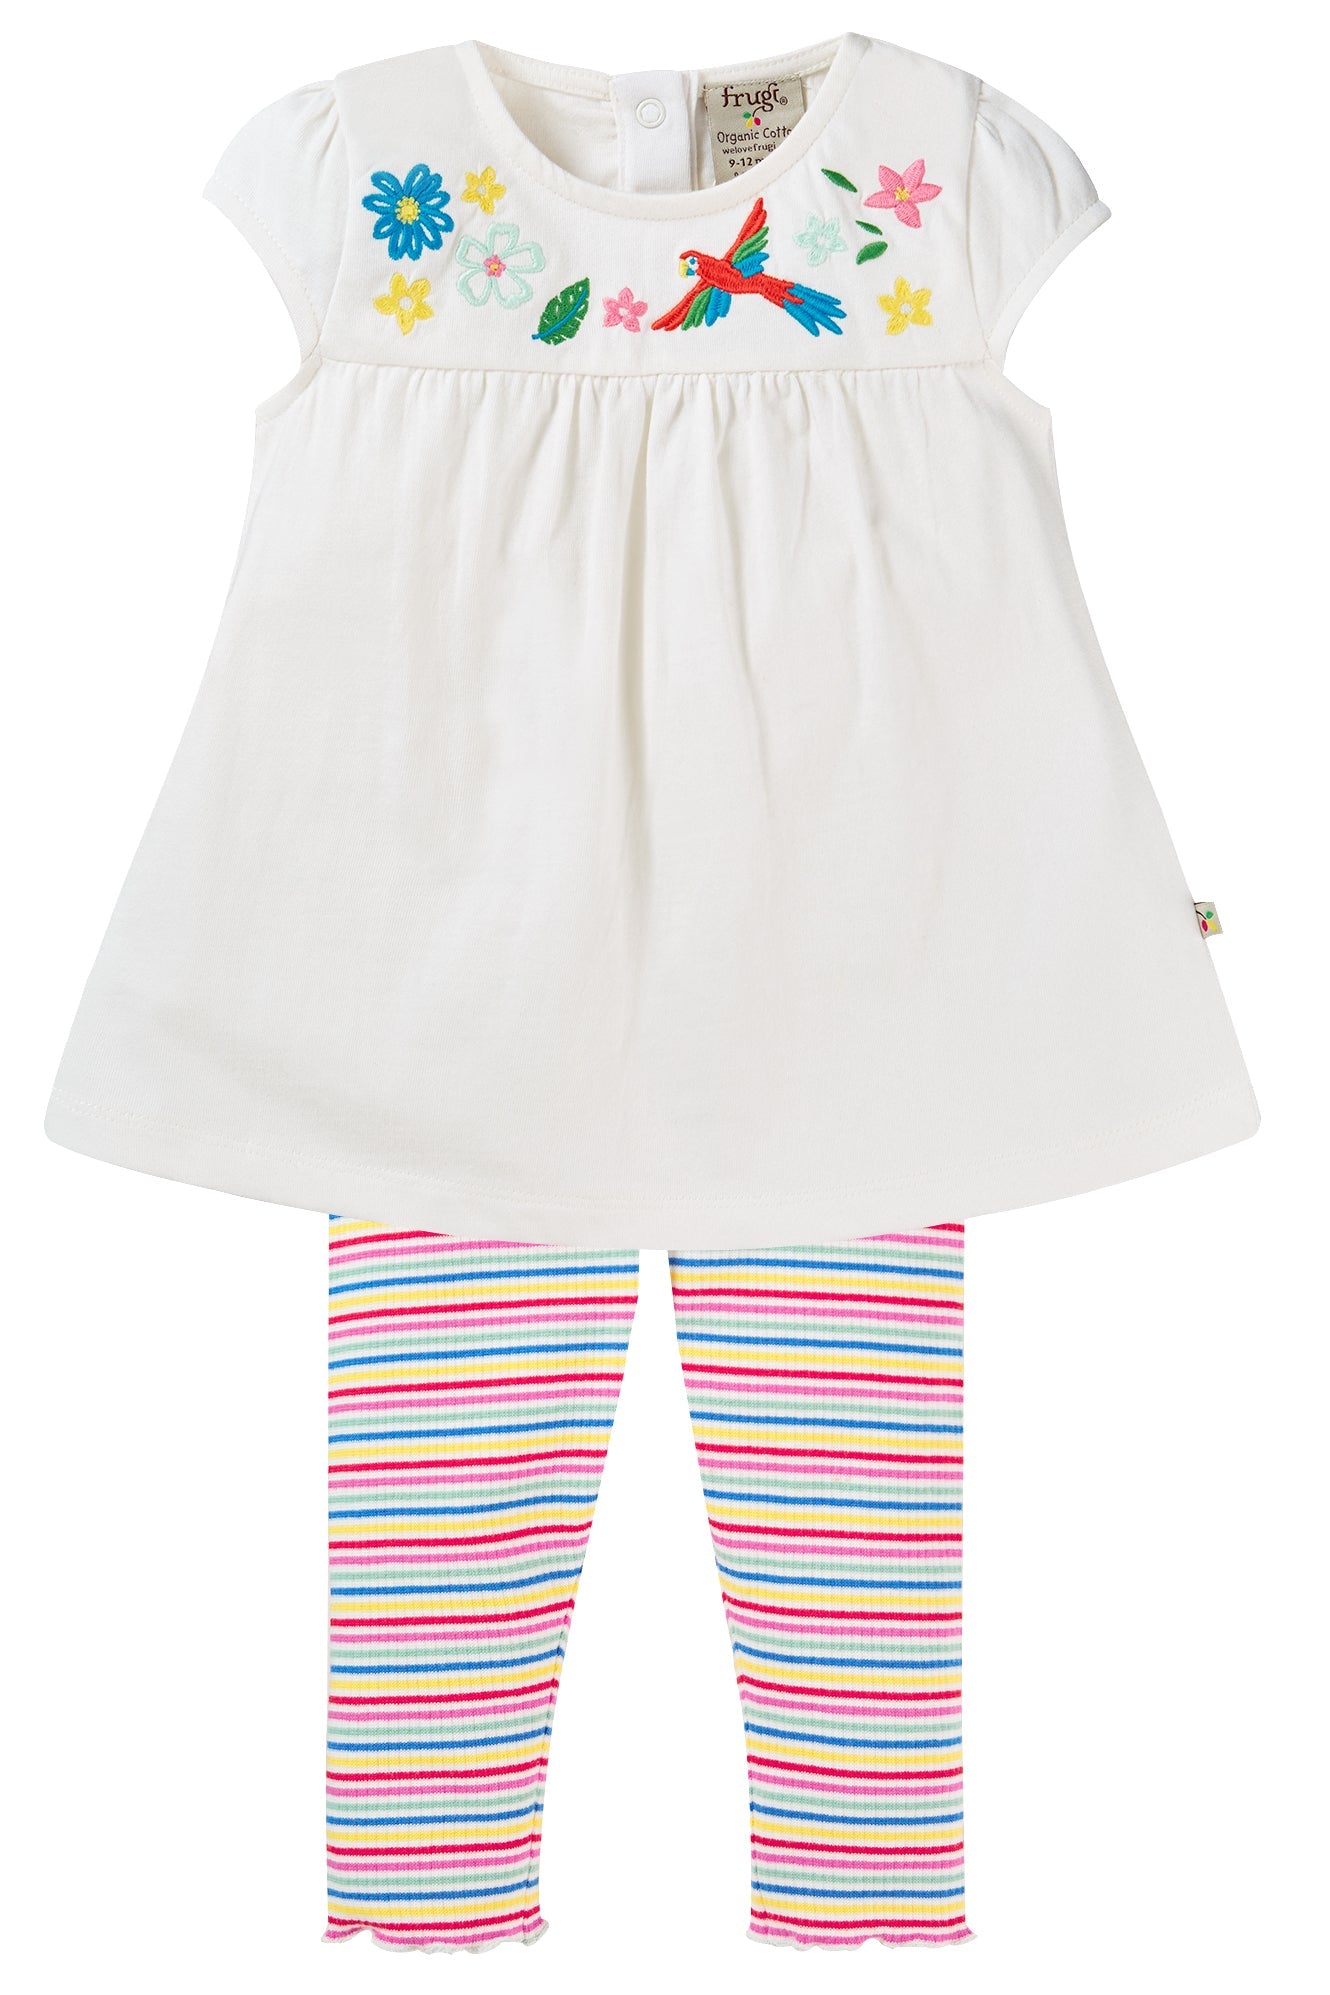 Frugi Jade Outfit - Soft White/Rainbow Rib-Kids-Ohh! By Gum - Shop Sustainable